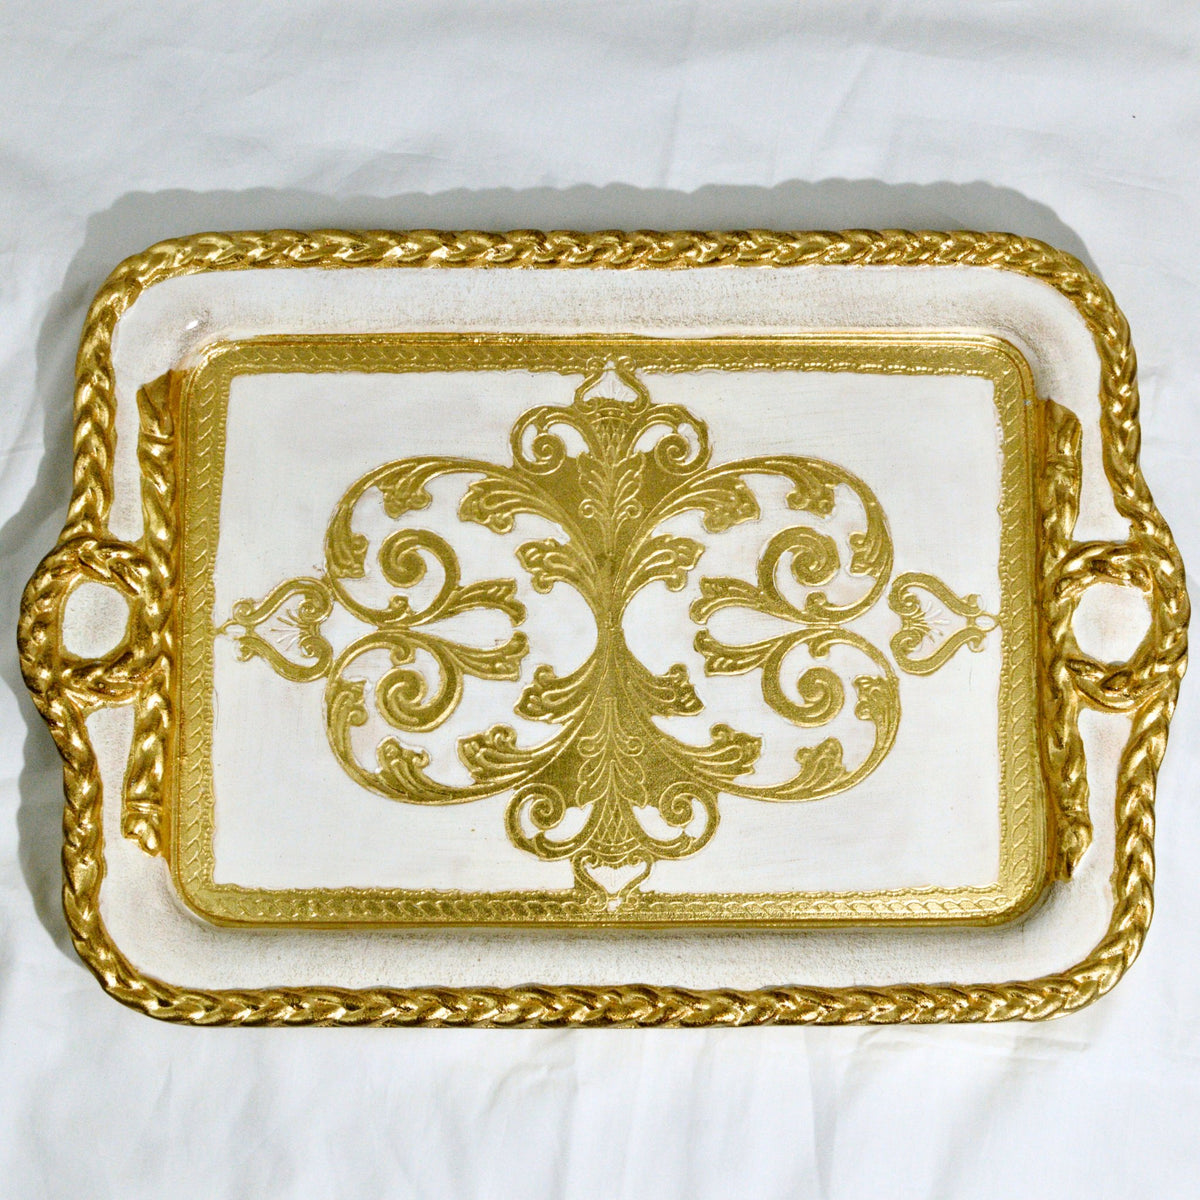 Florentine Carved Wood Tray, Gilded, Gold Rectangle, Made in Italy - My Italian Decor